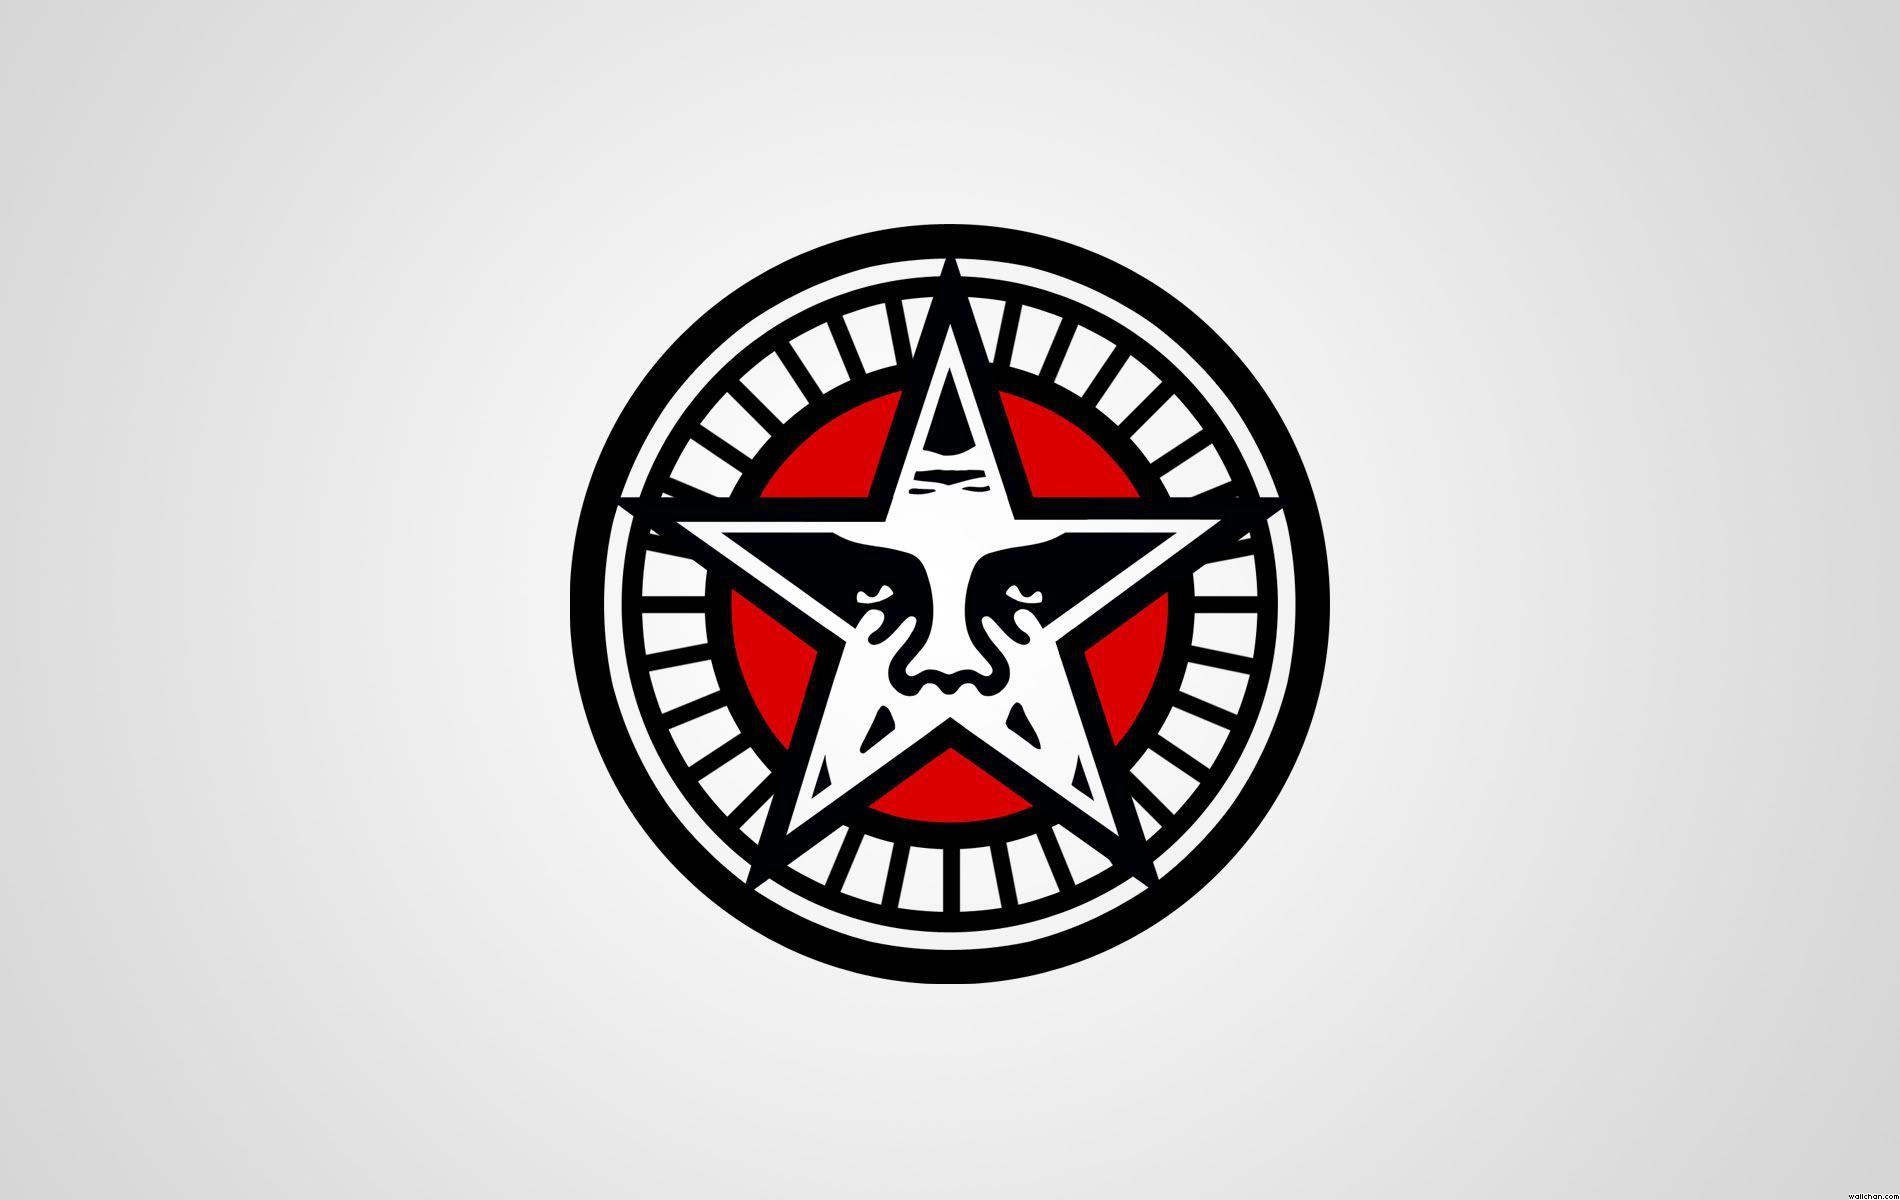 Obey Star Logo - Results For Obey Star Logo | Graphic design | Pinterest | Obey ...